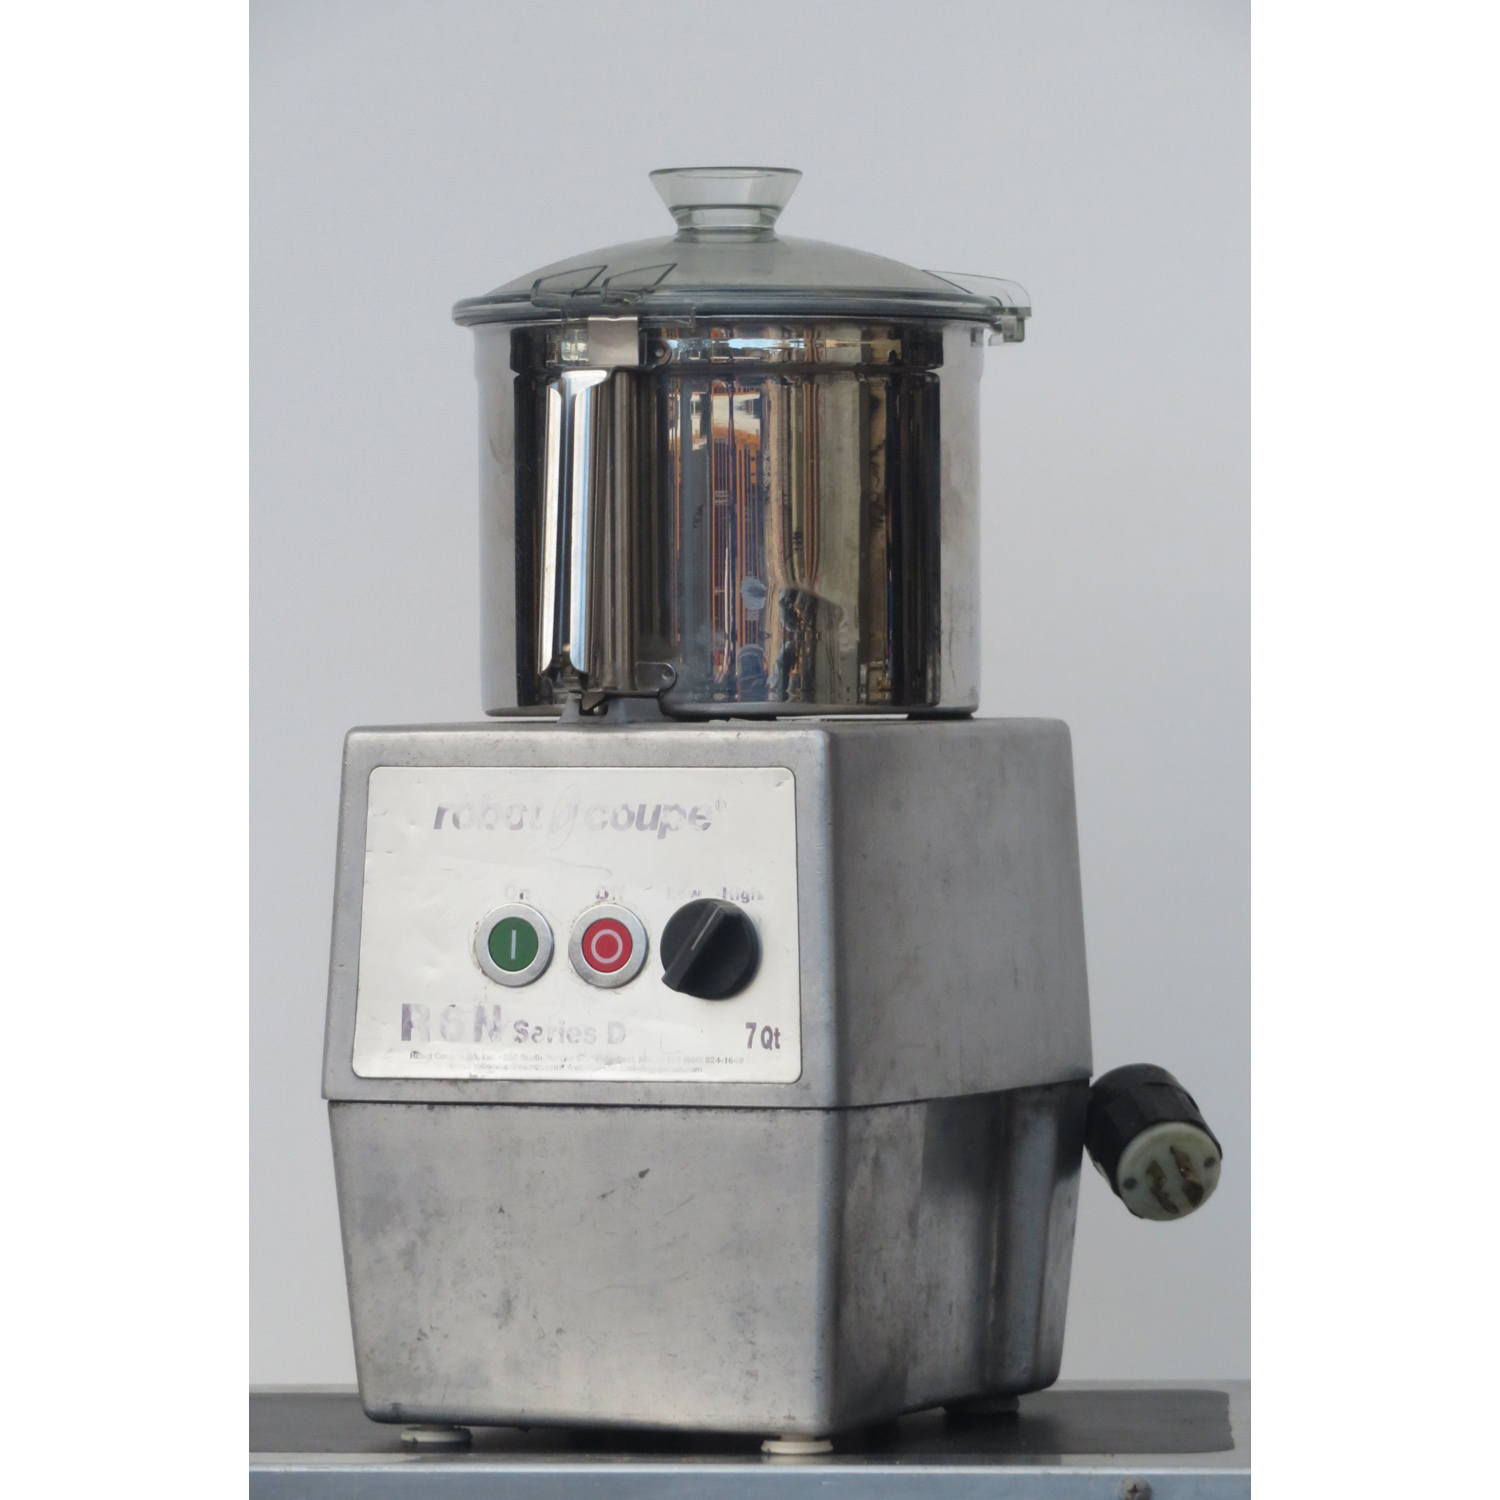 https://www.bakedeco.com/images/large/robot_coupe_r6n_food_processor_used_very_good_cond_64684.JPG